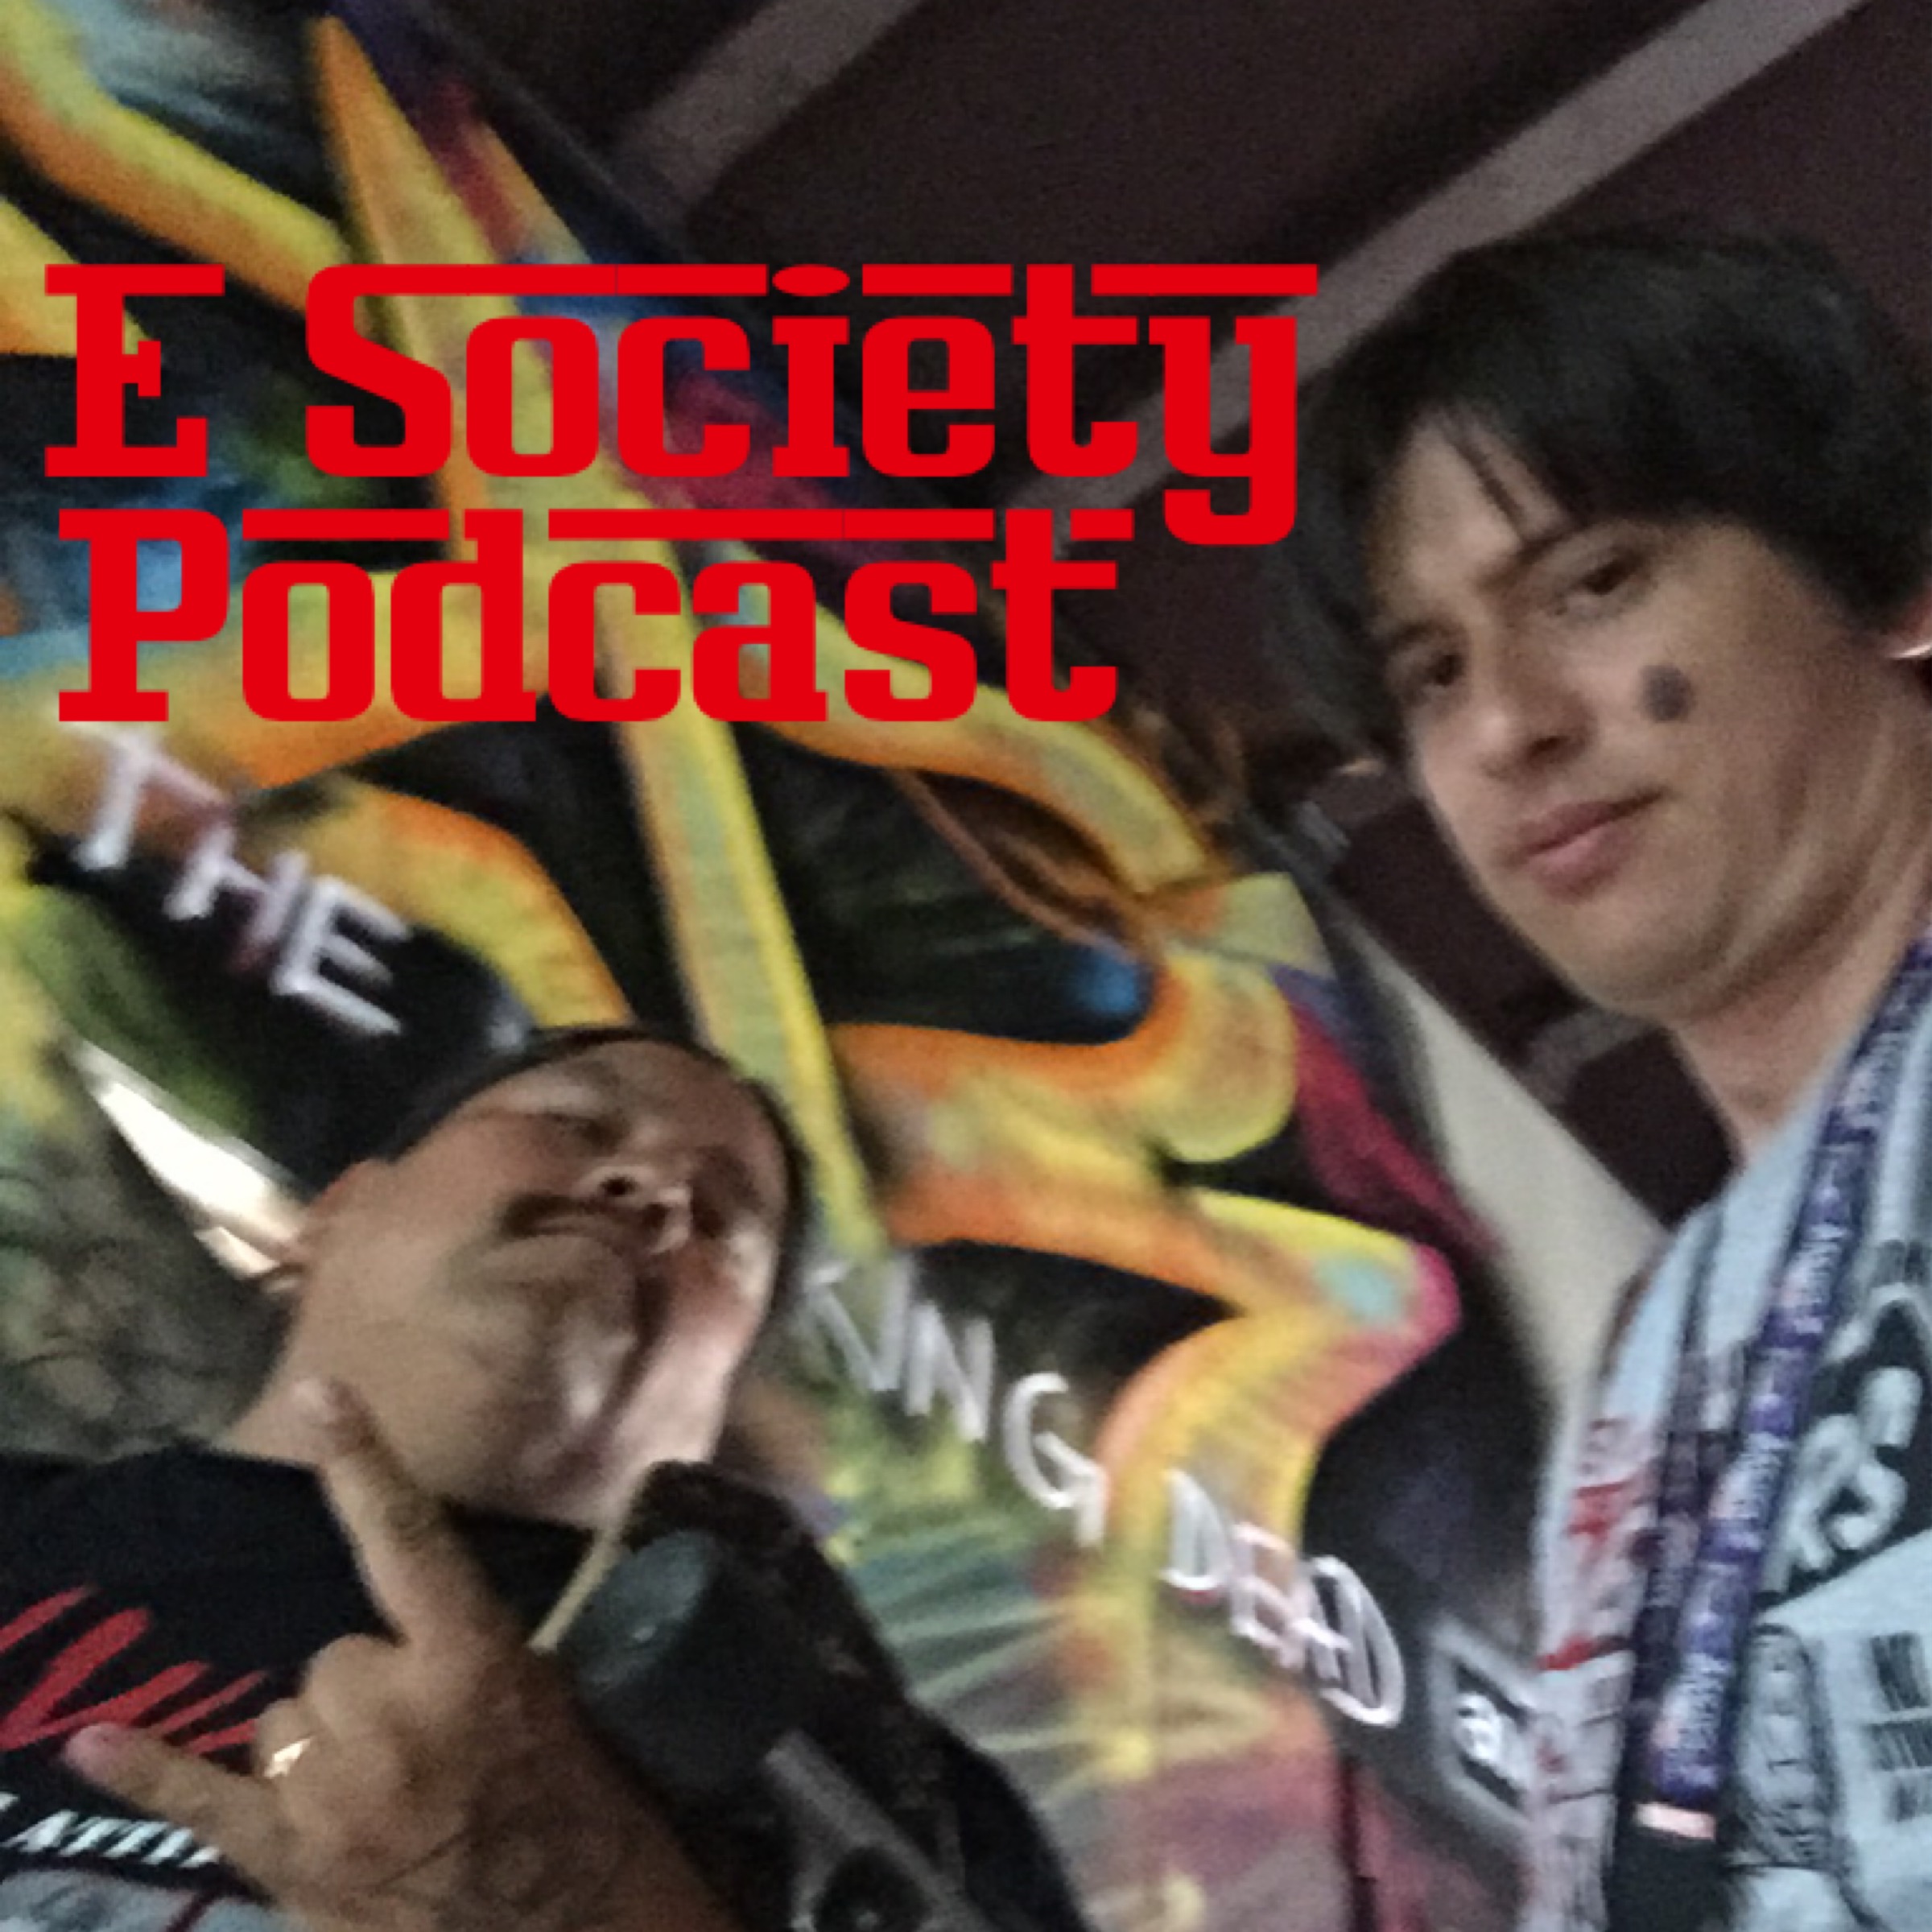 E Society Podcast - Ep. 91: Roseanne is back.